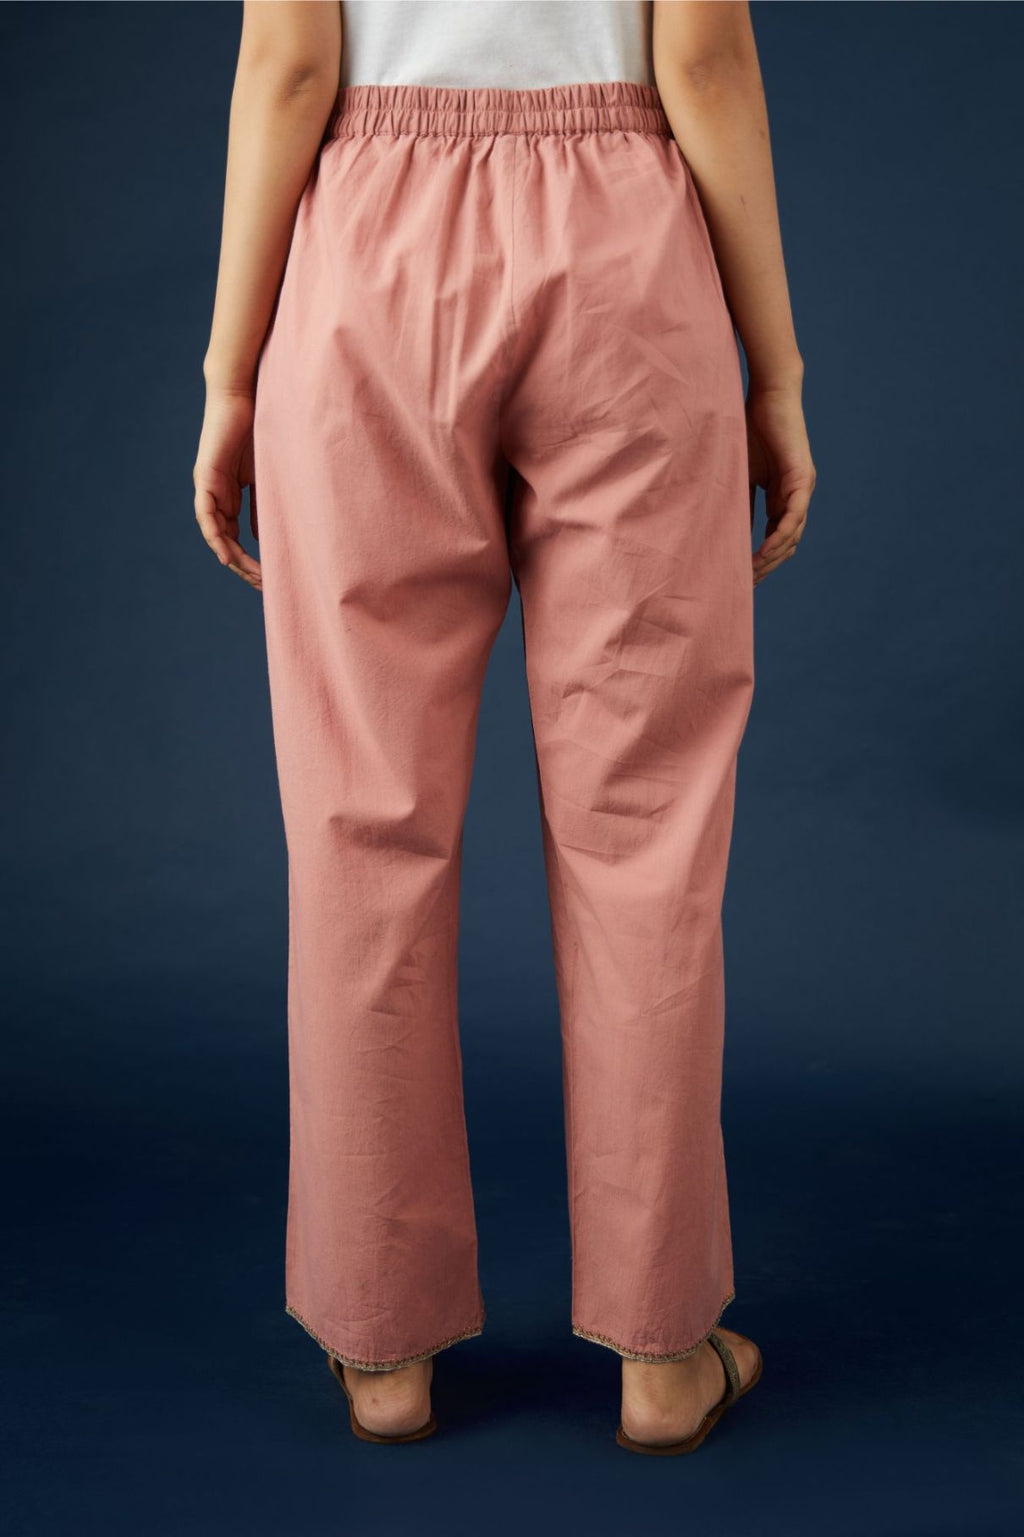 Dusty rose cotton straight pants with dull gold zari embroidery detailing at bottom hem. (Pants)